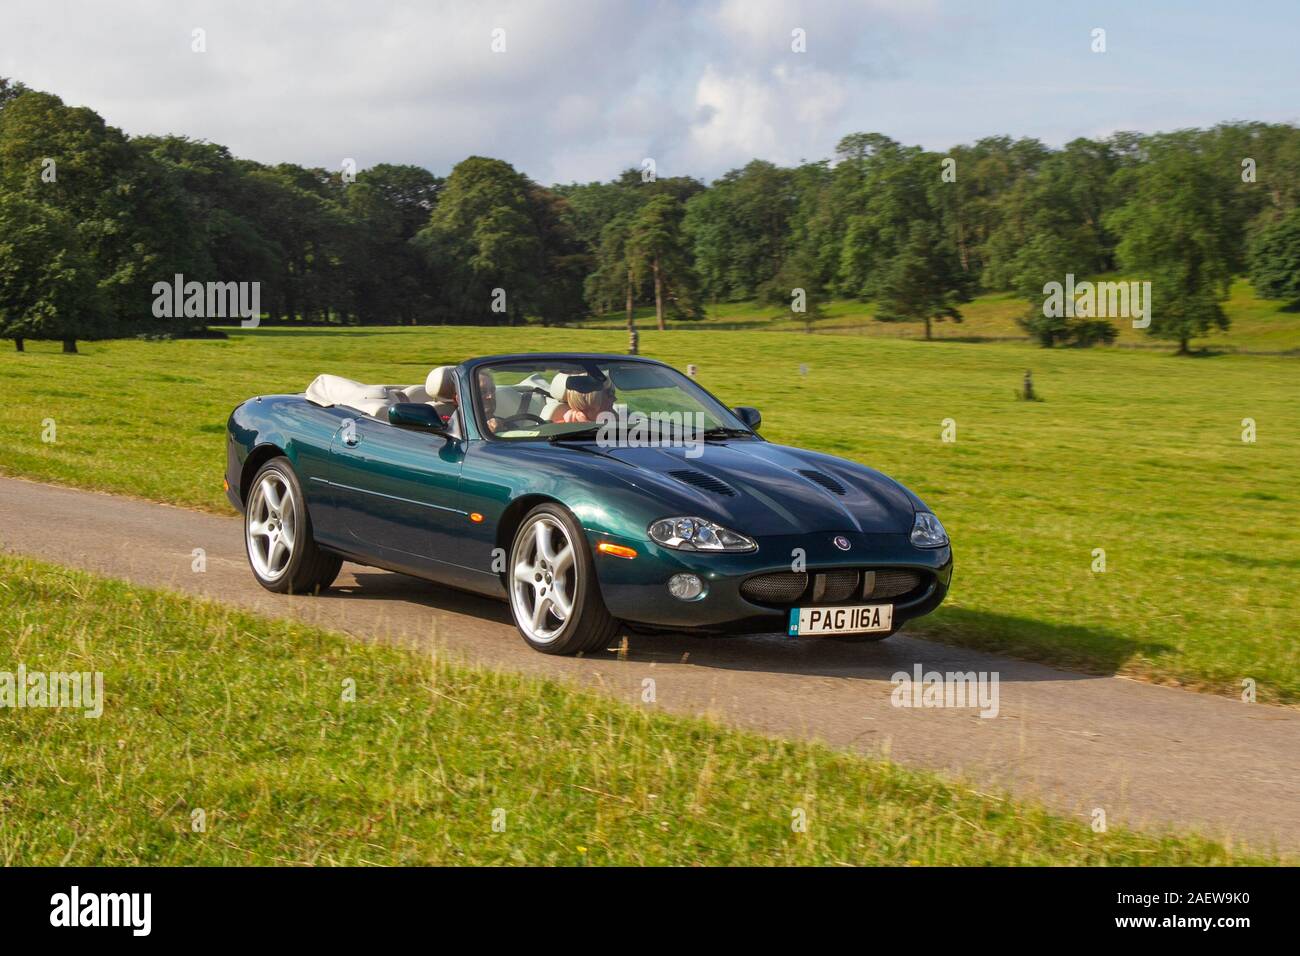 2002 green Jaguar XKR auto; Classic cars, historics, cherished, old timers, collectable restored vintage veteran, collector vehicles of yesteryear arriving for the Mark Woodward motoring event at Leighton Hall, Carnforth, UK Stock Photo